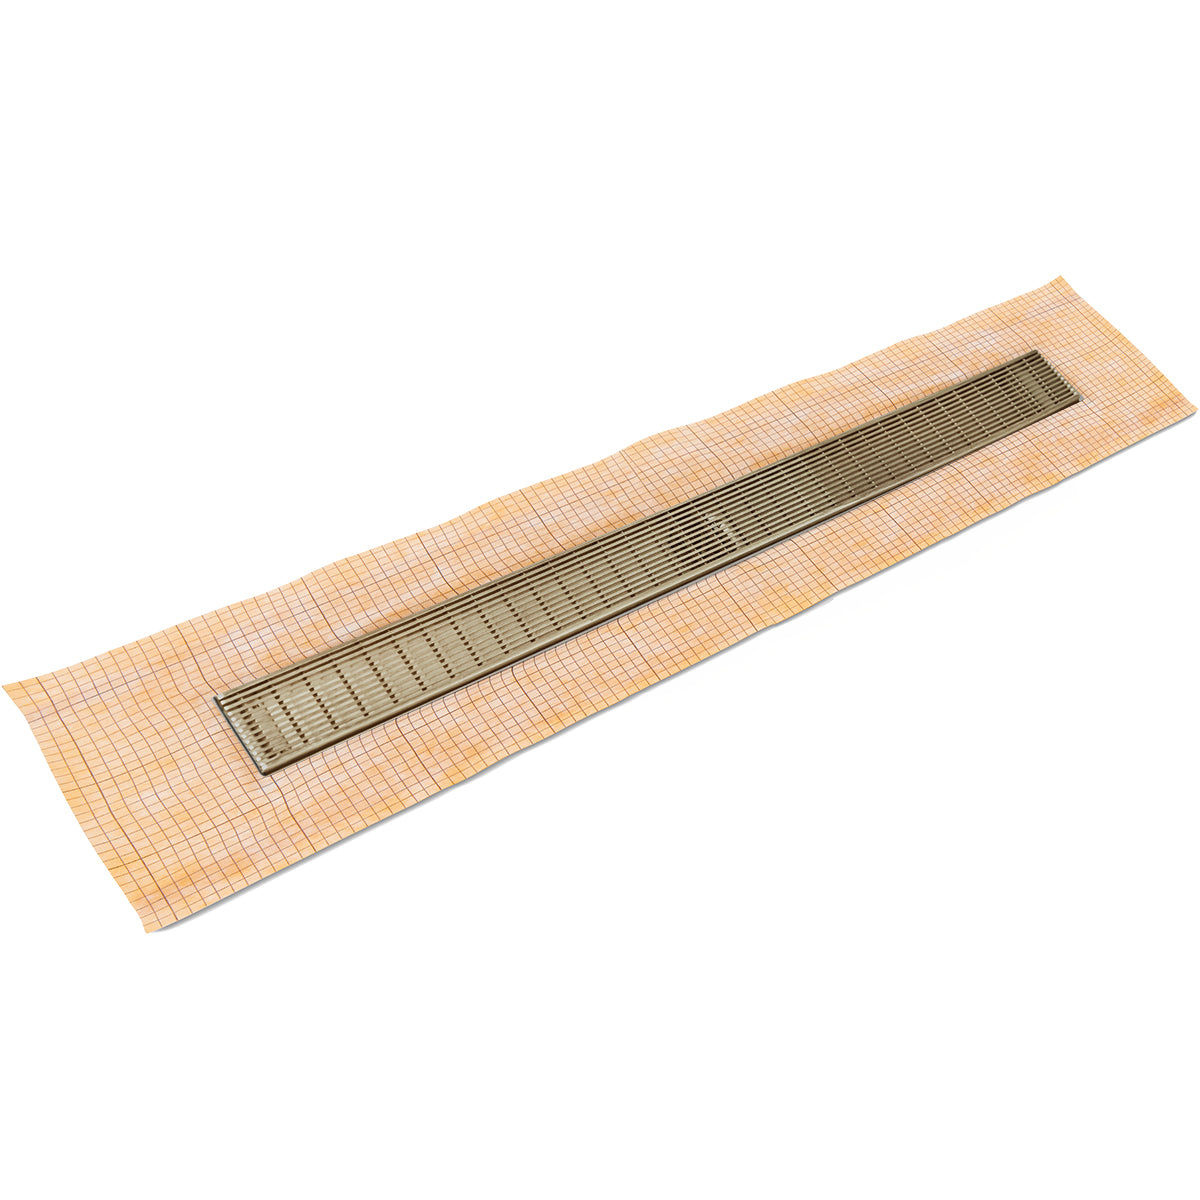 Infinity Drain 32" FCS Series Schluter-Kerdi - Fixed Flange Linear Drain Kit with 2 1/2" Wedge Wire Grate